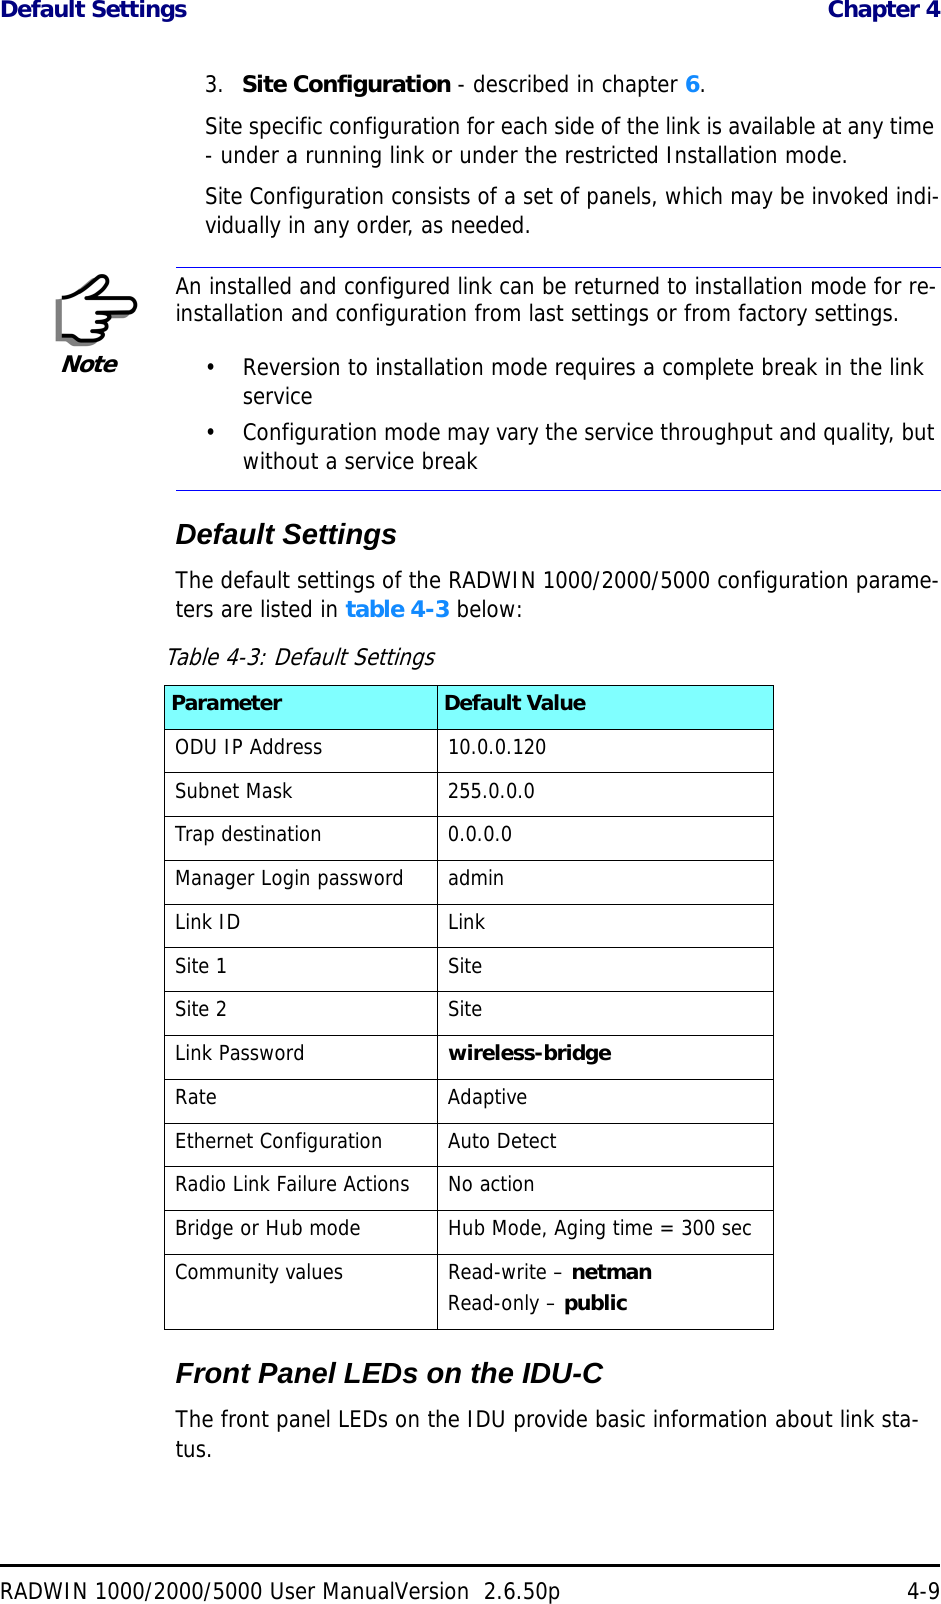 Default Settings  Chapter 4RADWIN 1000/2000/5000 User ManualVersion  2.6.50p 4-93.  Site Configuration - described in chapter 6.Site specific configuration for each side of the link is available at any time - under a running link or under the restricted Installation mode.Site Configuration consists of a set of panels, which may be invoked indi-vidually in any order, as needed.Default SettingsThe default settings of the RADWIN 1000/2000/5000 configuration parame-ters are listed in table 4-3 below:Front Panel LEDs on the IDU-CThe front panel LEDs on the IDU provide basic information about link sta-tus. NoteAn installed and configured link can be returned to installation mode for re-installation and configuration from last settings or from factory settings.• Reversion to installation mode requires a complete break in the link service• Configuration mode may vary the service throughput and quality, but without a service breakTable 4-3: Default SettingsParameter Default ValueODU IP Address 10.0.0.120Subnet Mask 255.0.0.0Trap destination 0.0.0.0Manager Login password adminLink ID Link Site 1 SiteSite 2 SiteLink Password wireless-bridgeRate AdaptiveEthernet Configuration Auto DetectRadio Link Failure Actions No actionBridge or Hub mode Hub Mode, Aging time = 300 secCommunity values Read-write – netmanRead-only – public